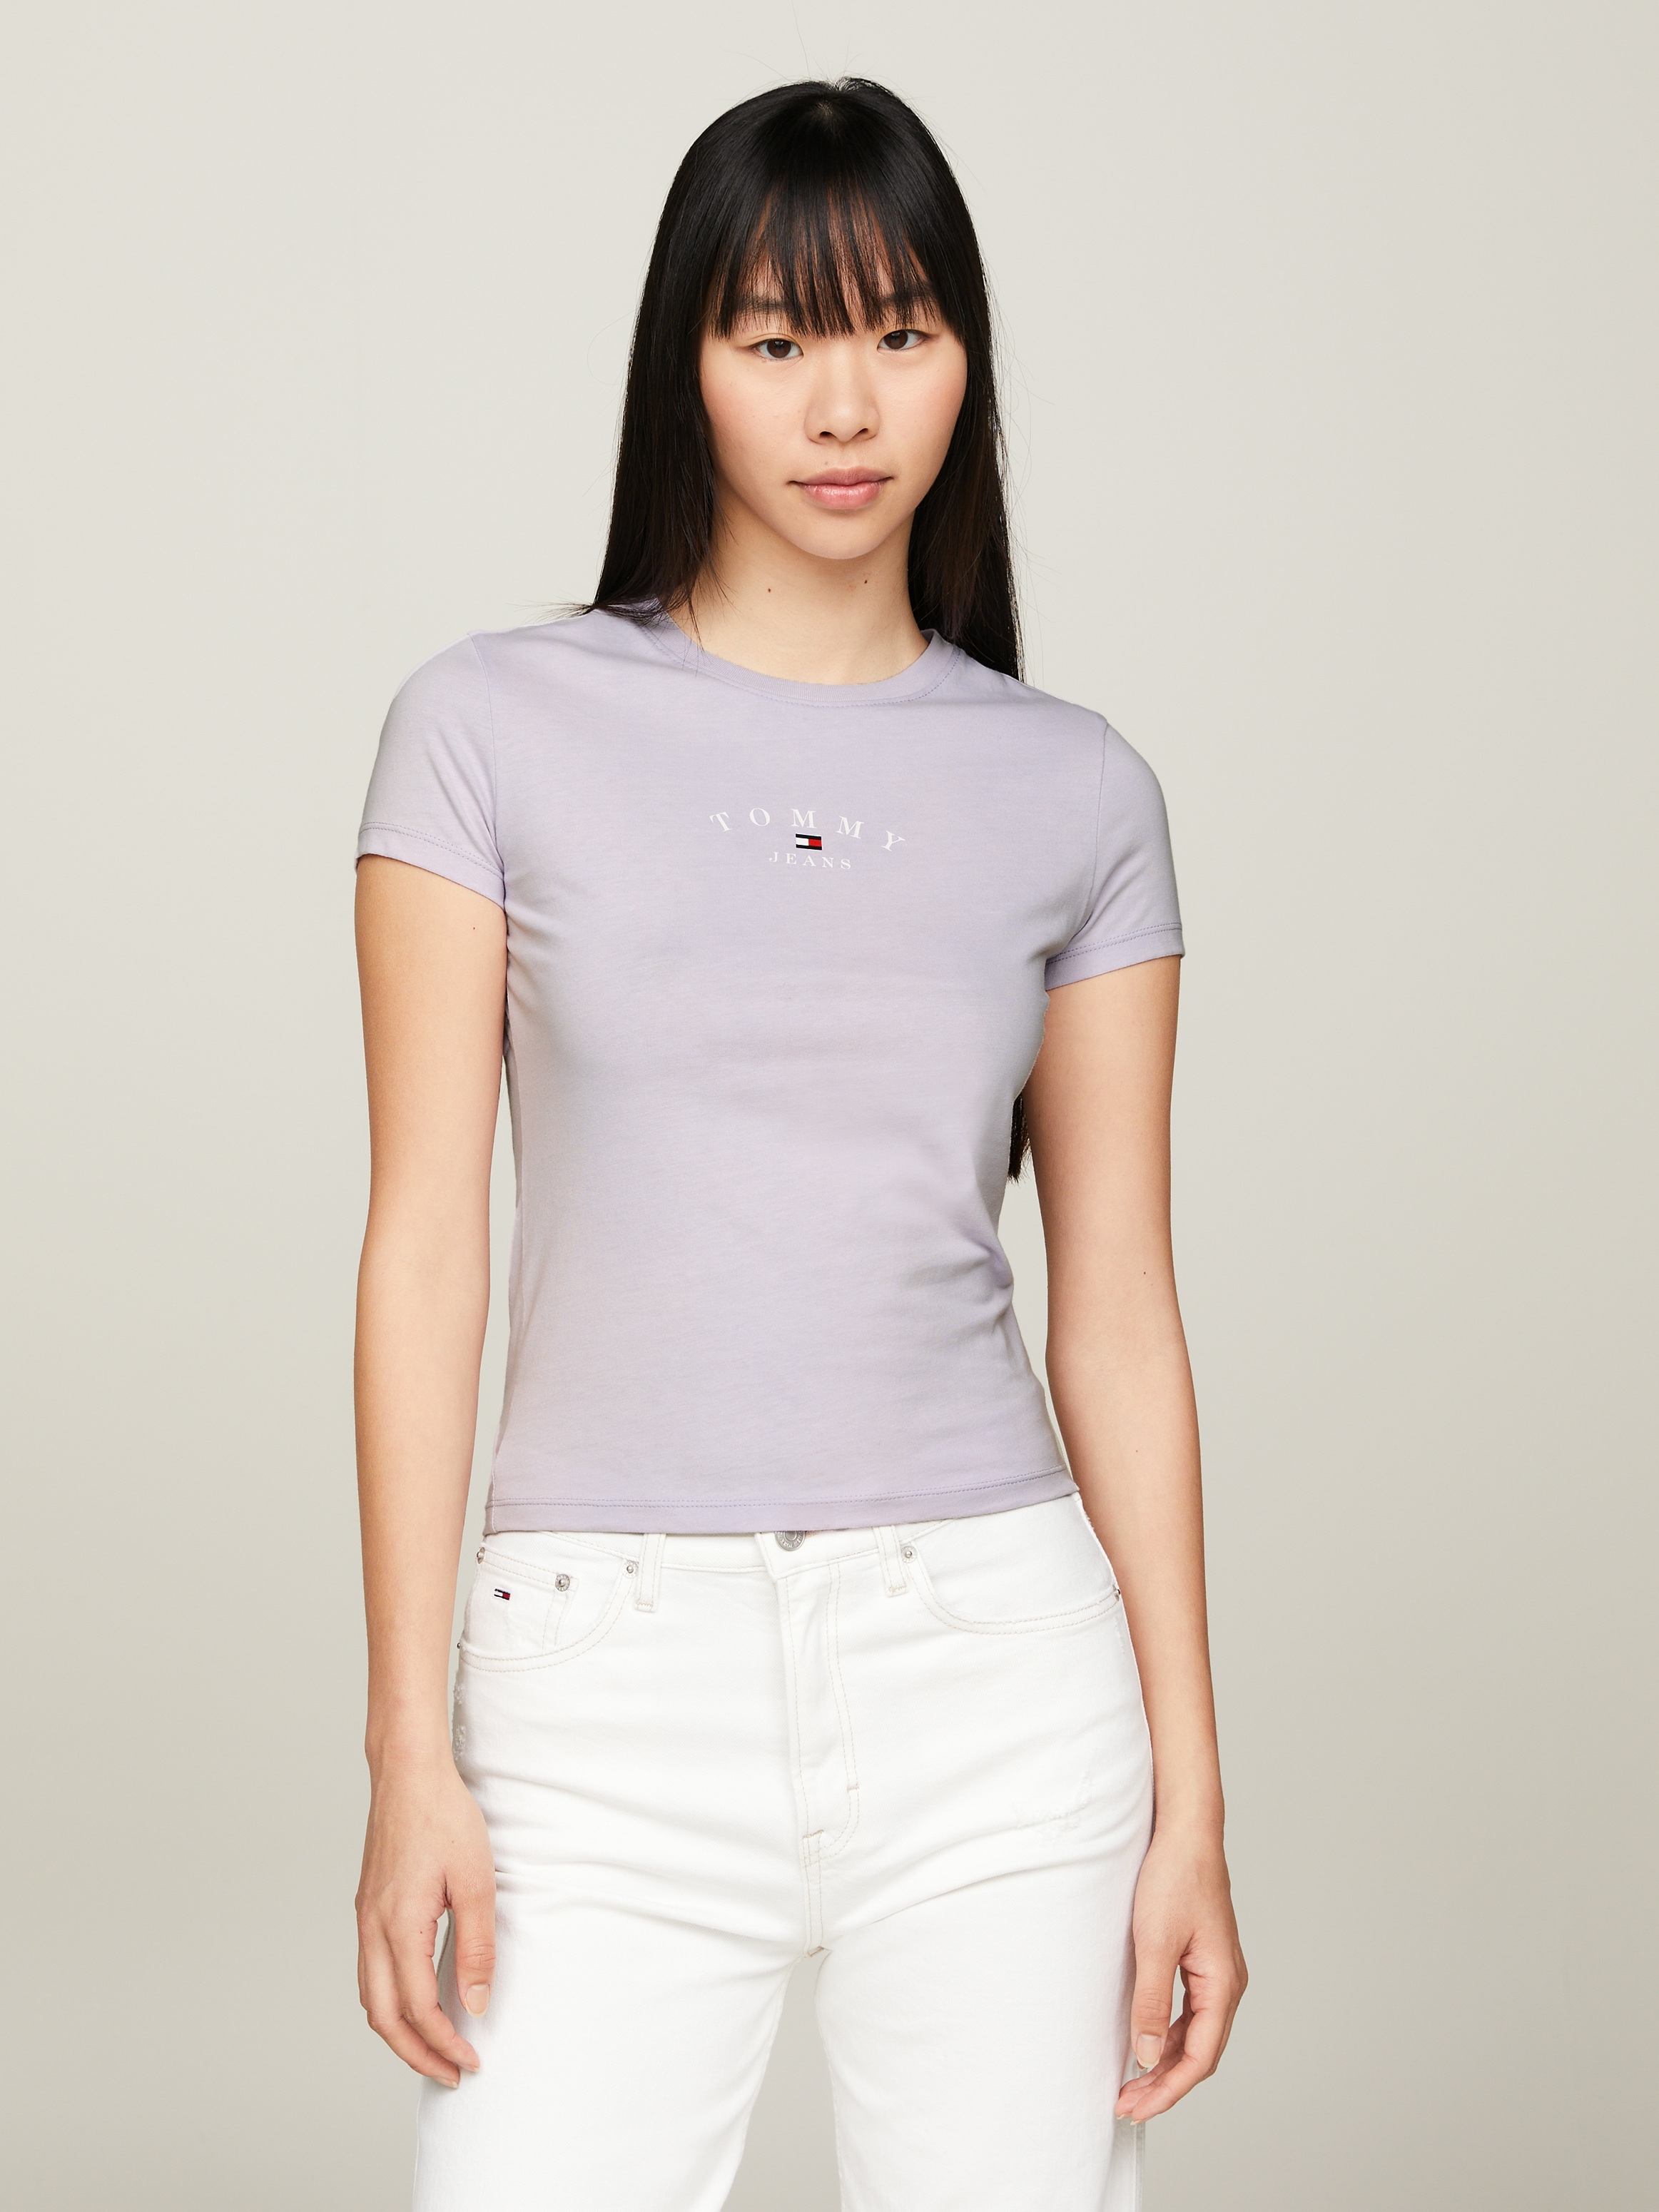 Tommy Jeans T-Shirt »TJW SLIM ESSENTIAL LOGO 2 SS«, mit Tommy Jeans Flagge